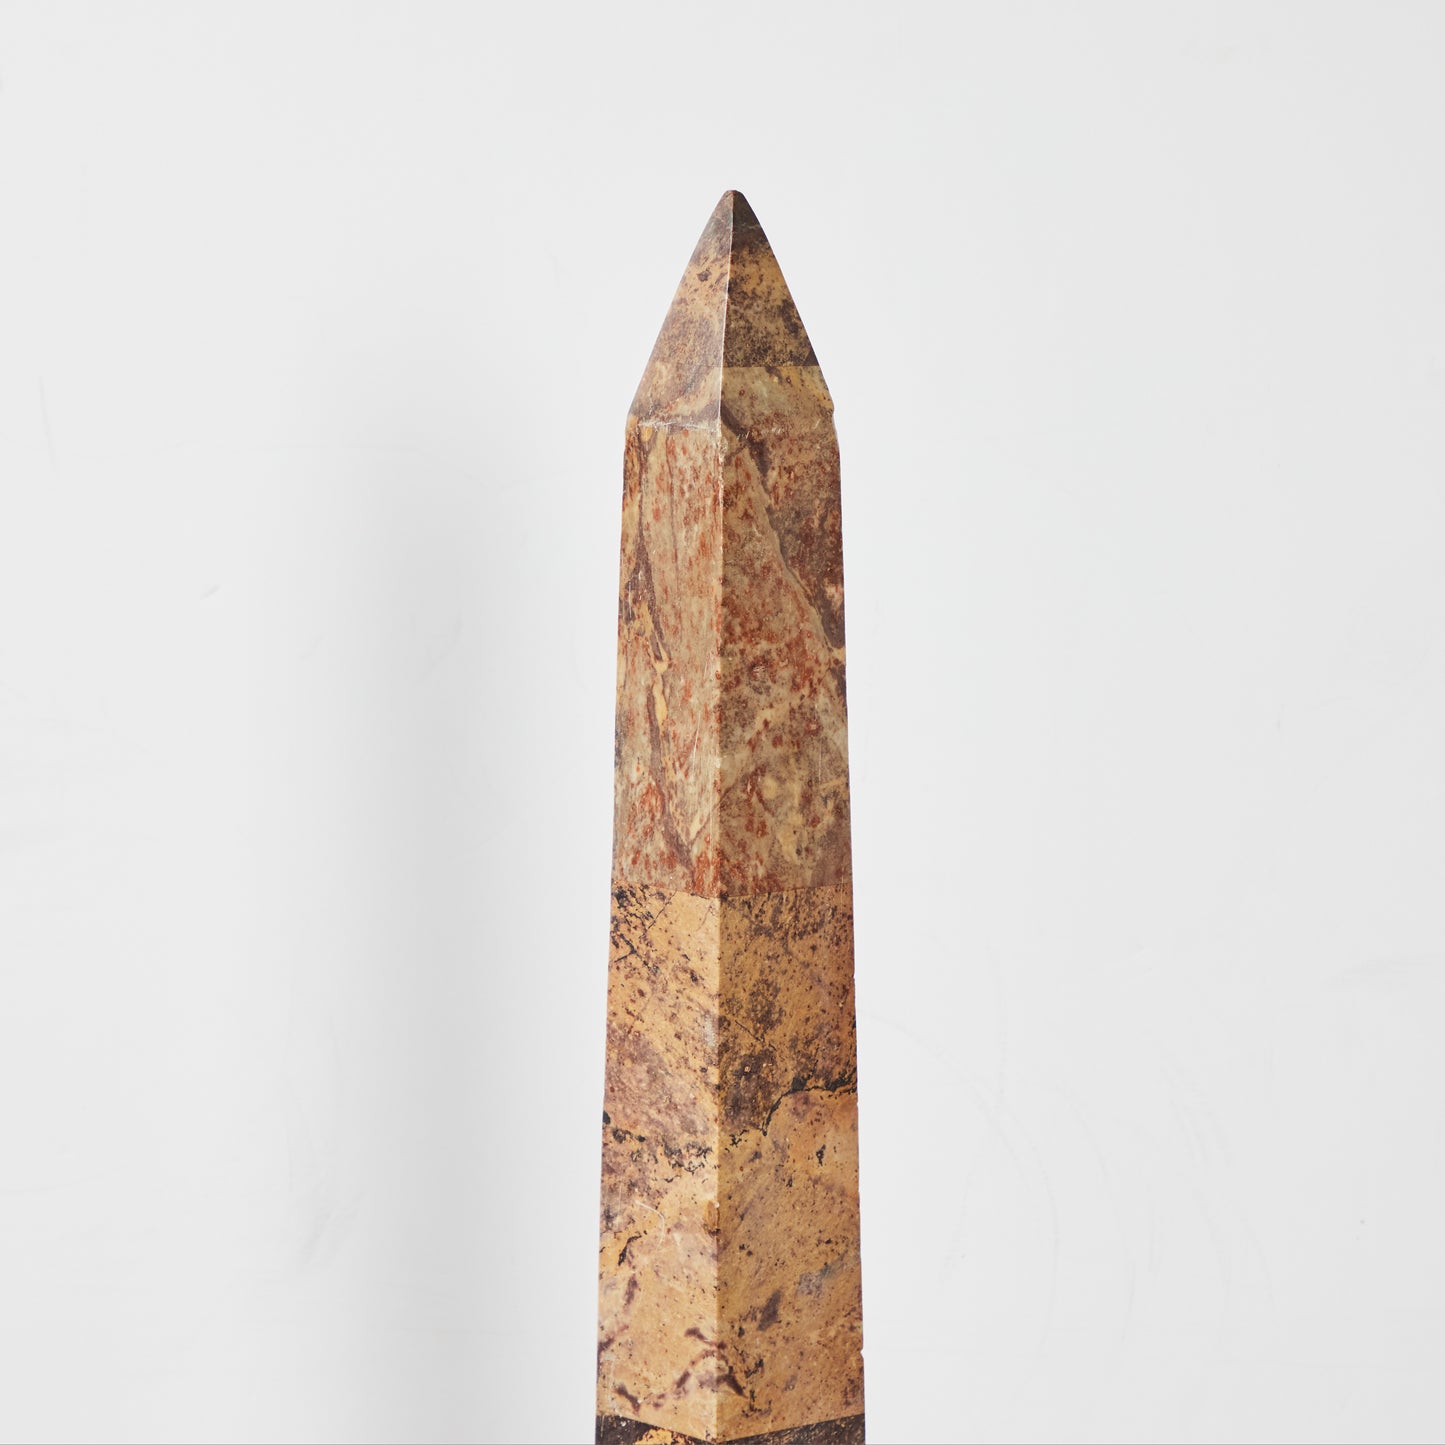 Large Marble Obelisk with Brass Mount